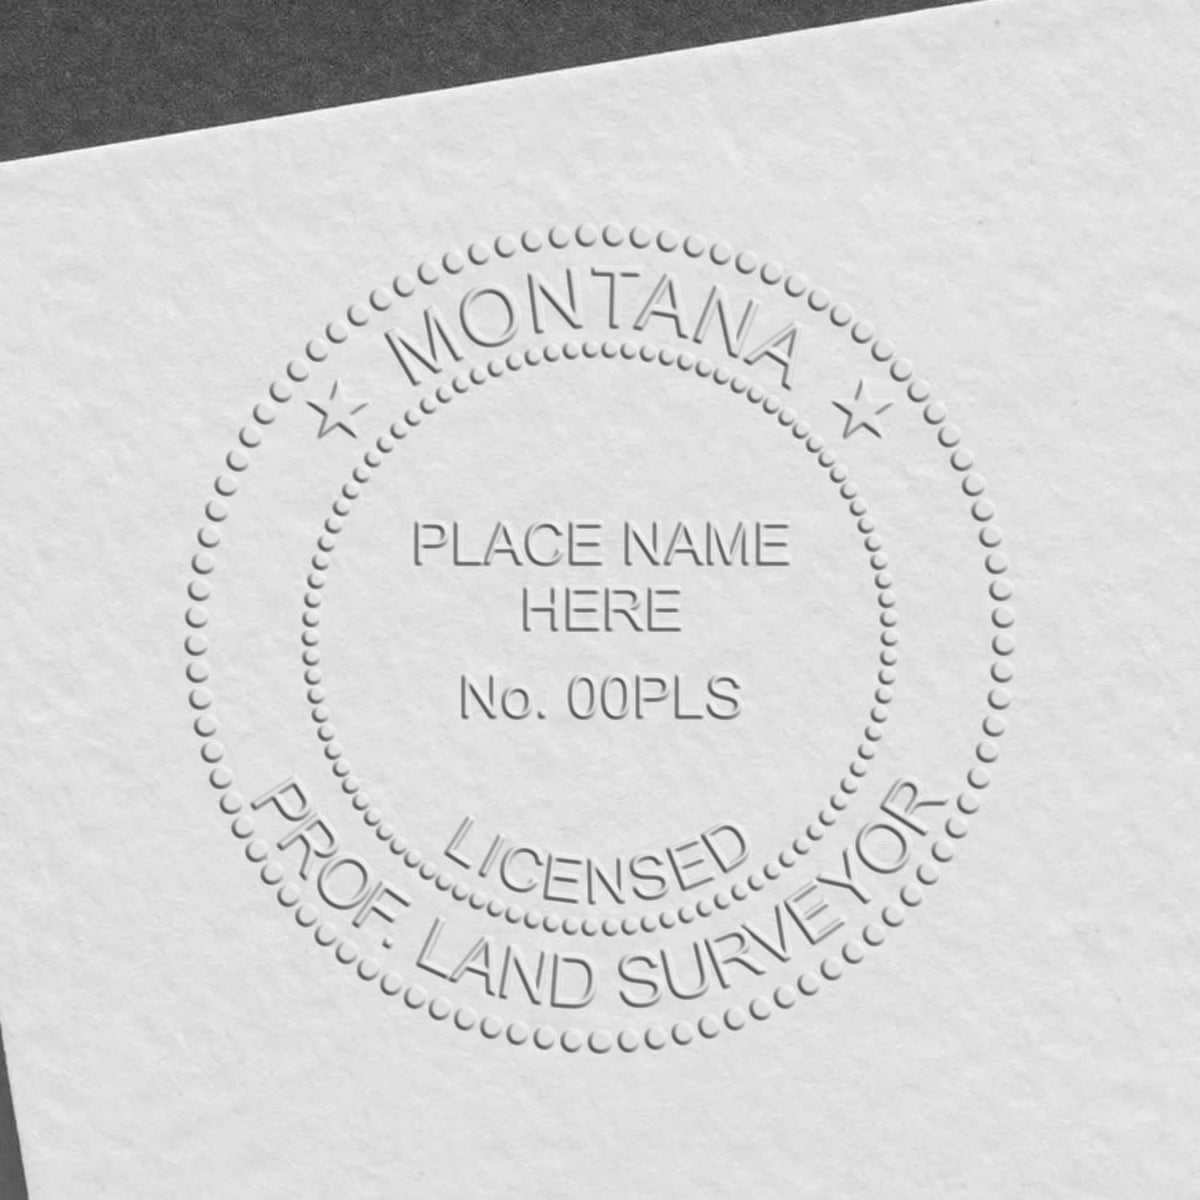 An alternative view of the Heavy Duty Cast Iron Montana Land Surveyor Seal Embosser stamped on a sheet of paper showing the image in use